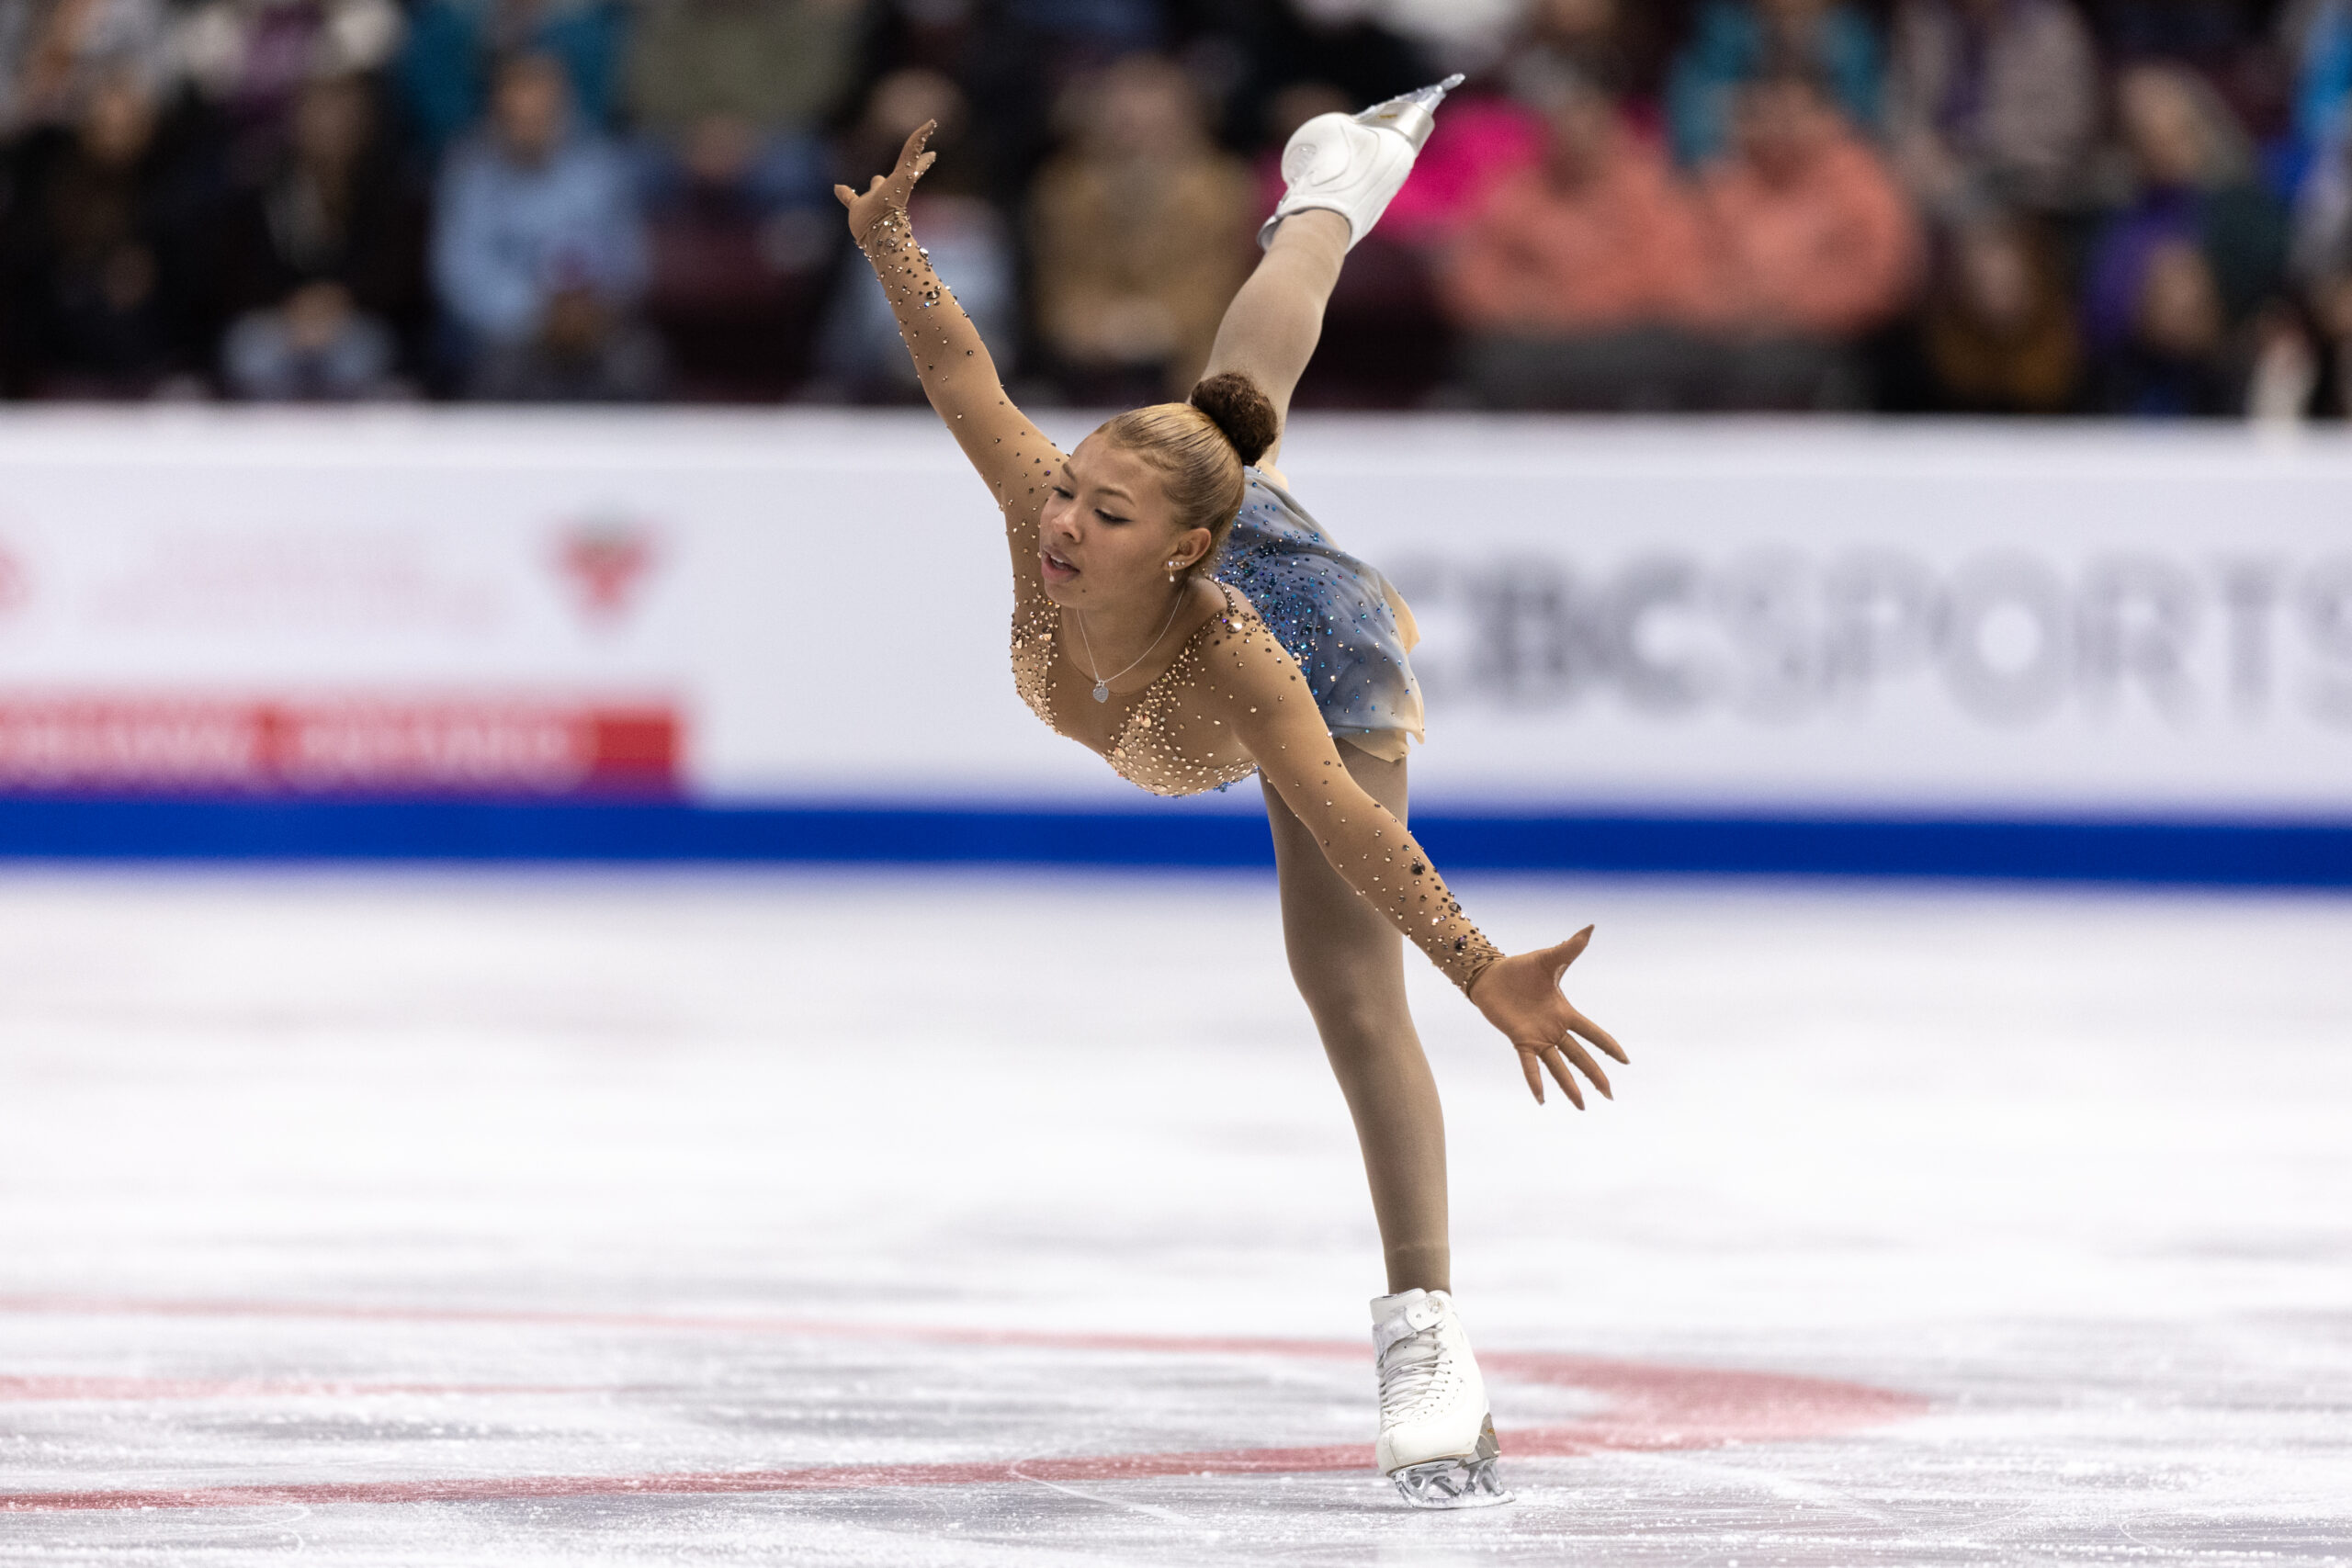 Starr Andrews Becomes First Black Woman to Win Medal at US Figure Skating Championships Since 1988